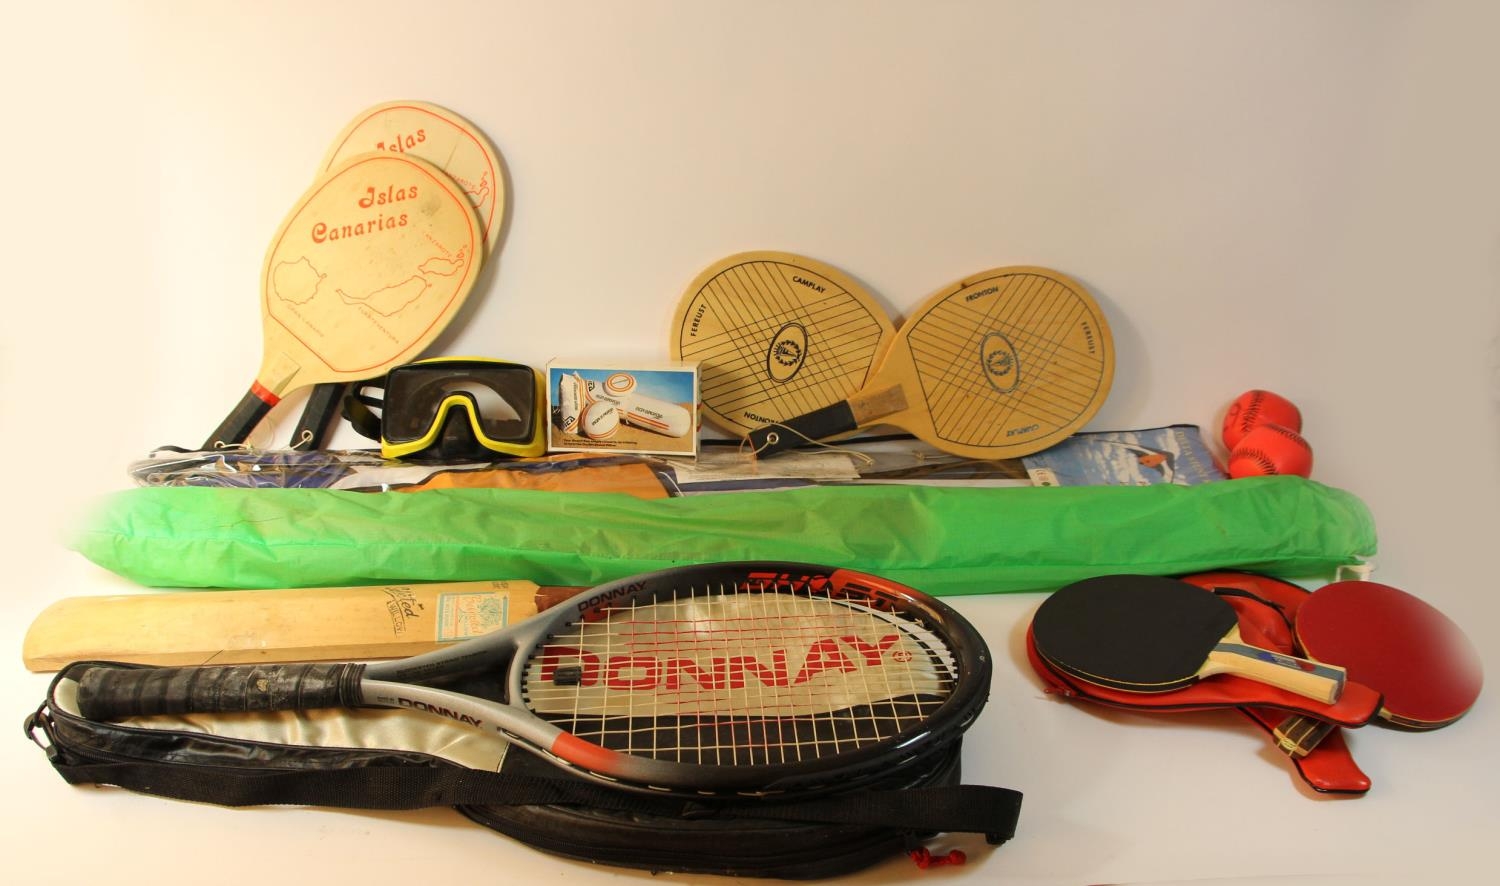 Two stunt kites together with sporting equipment to include, cricket bat & balls, tennis rackets and